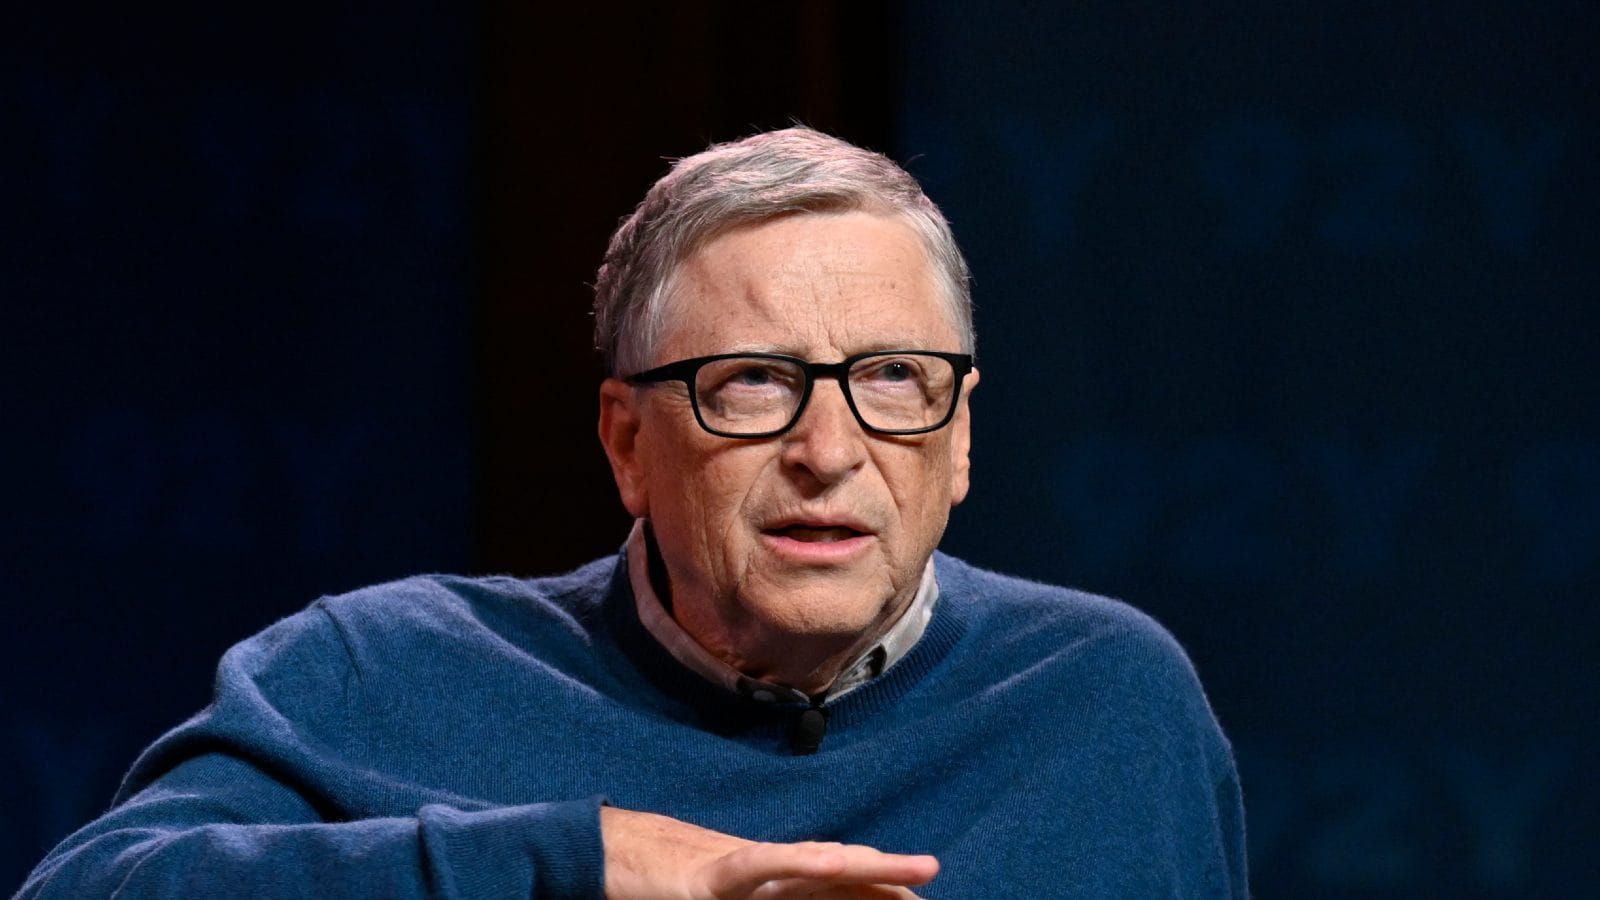 Here’s How Bill Gates Plans To Drop Off The List of Wealthiest People